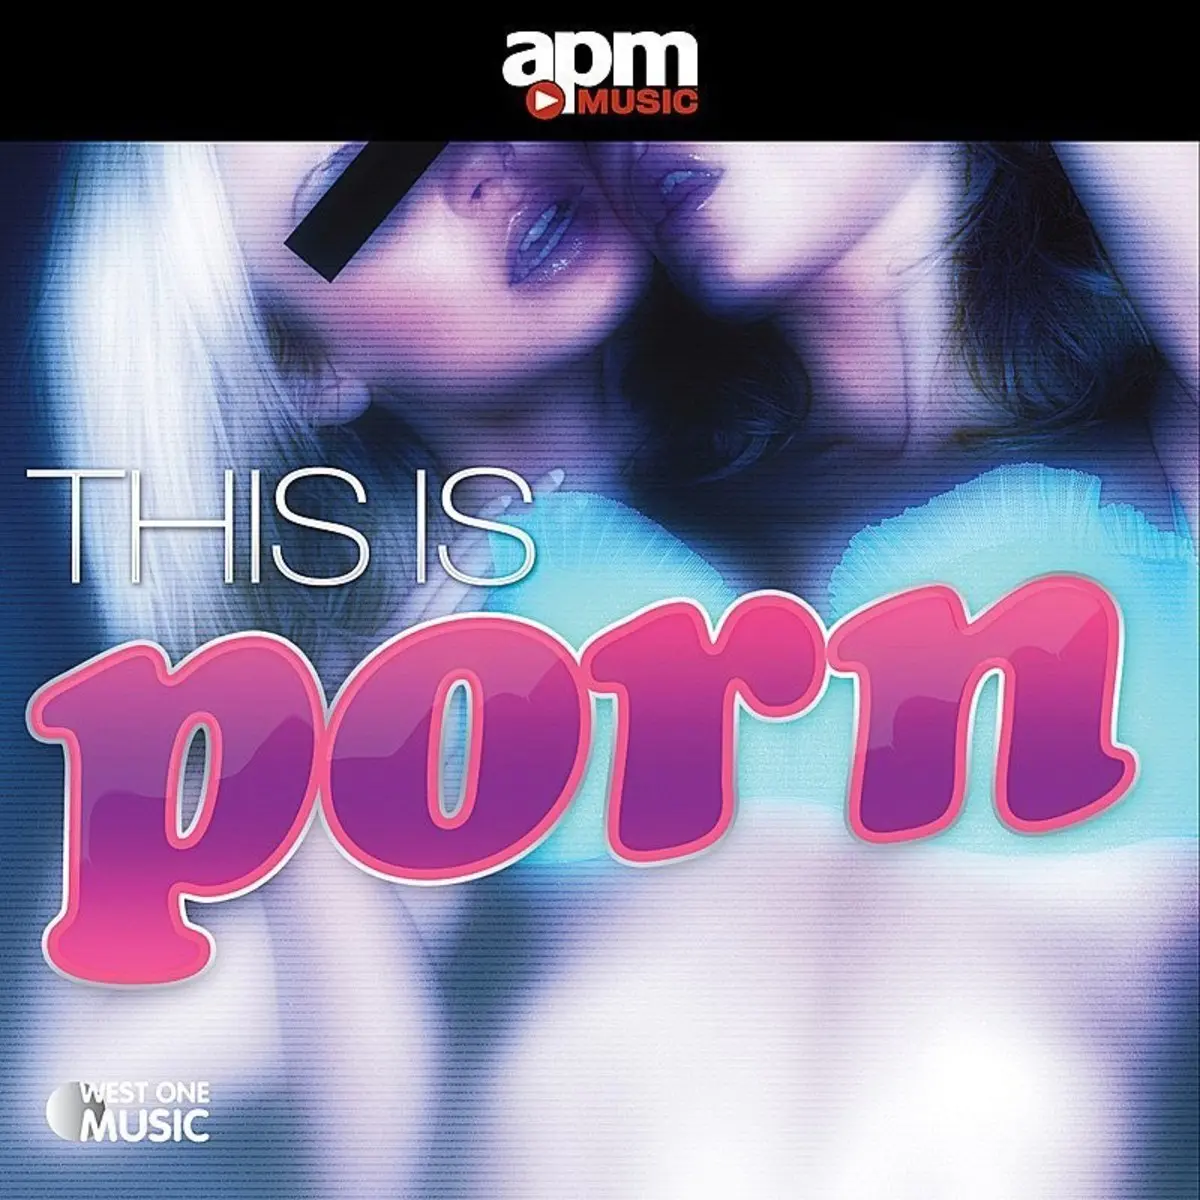 Odia Panu - This Is Porn Songs Download: This Is Porn MP3 Songs Online Free on ...